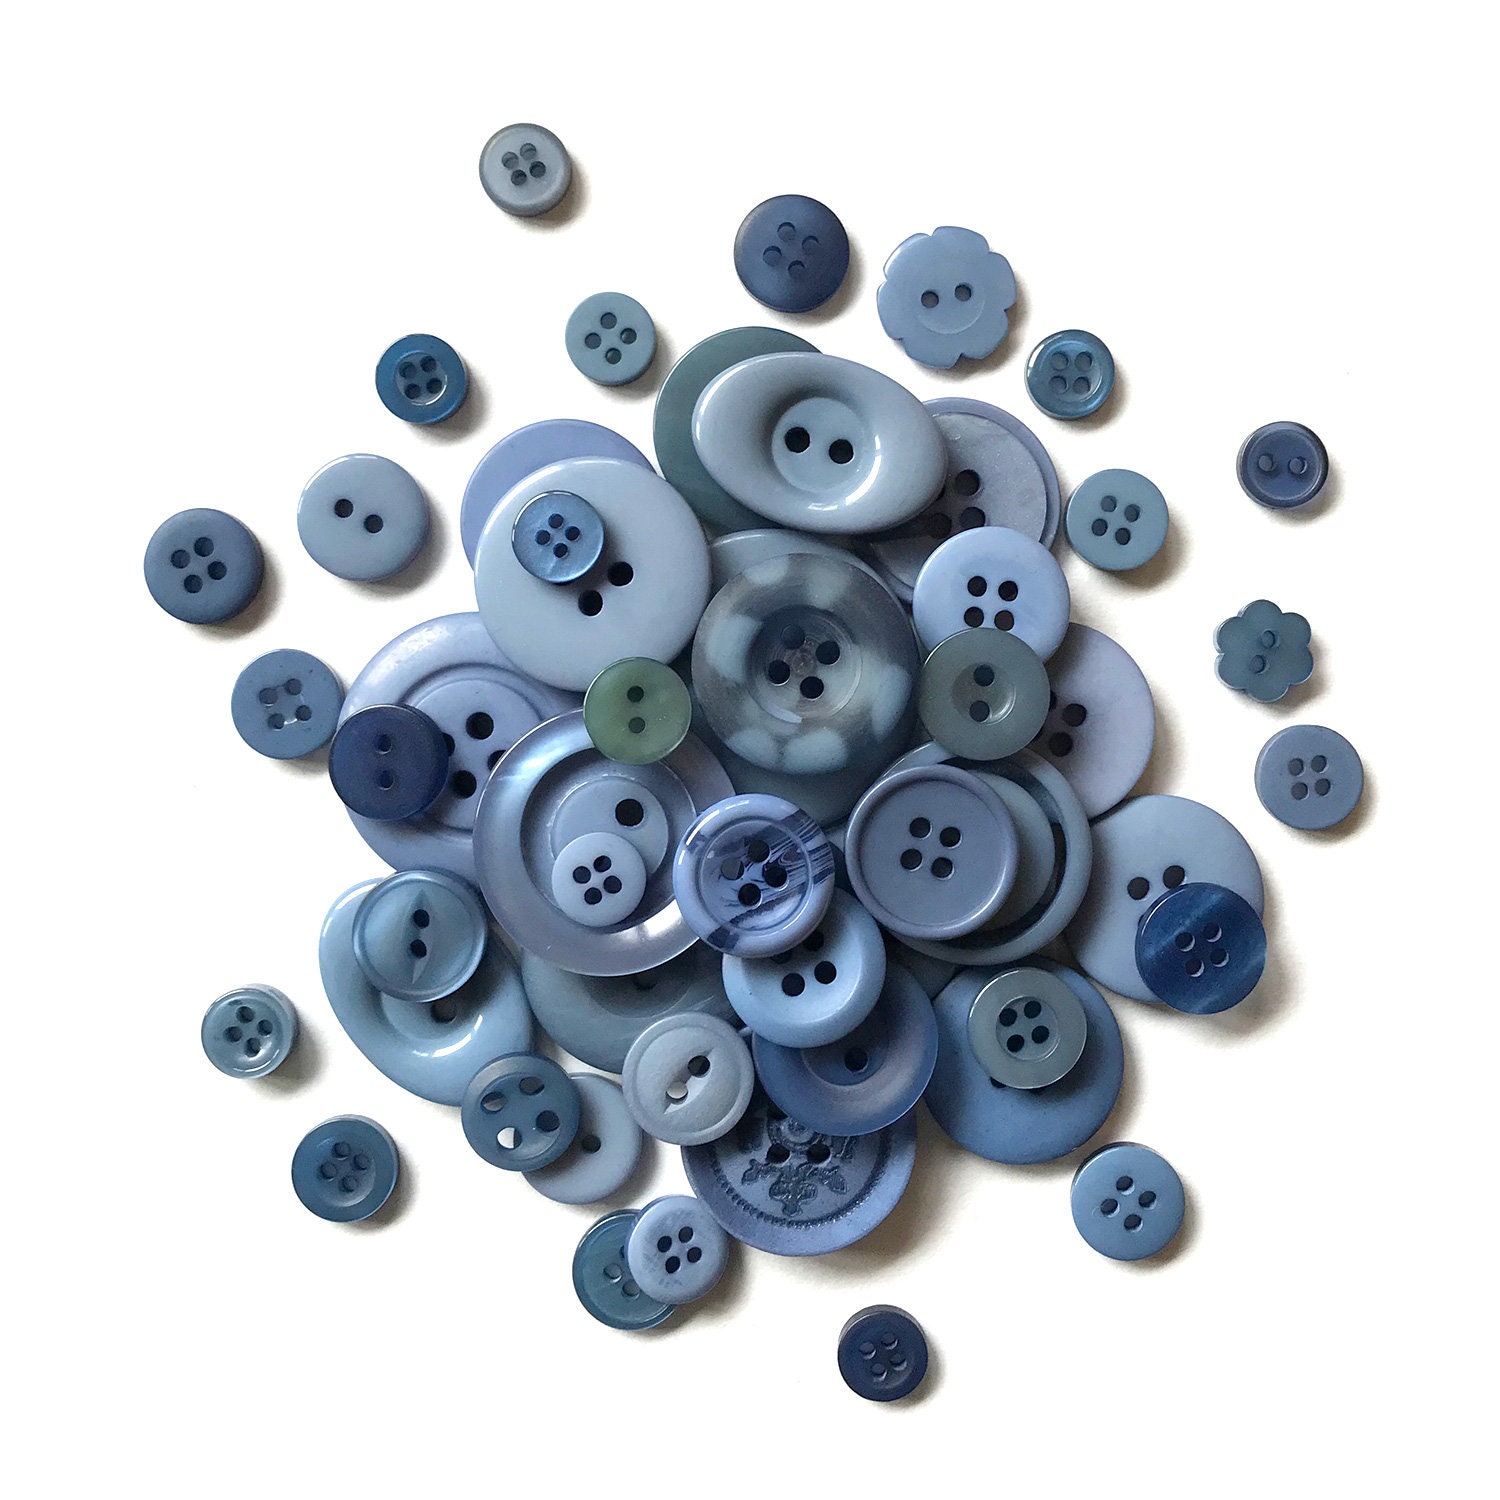 Buttons Galore and More Craft & Sewing Buttons - Quilt Hearts - 60 Buttons